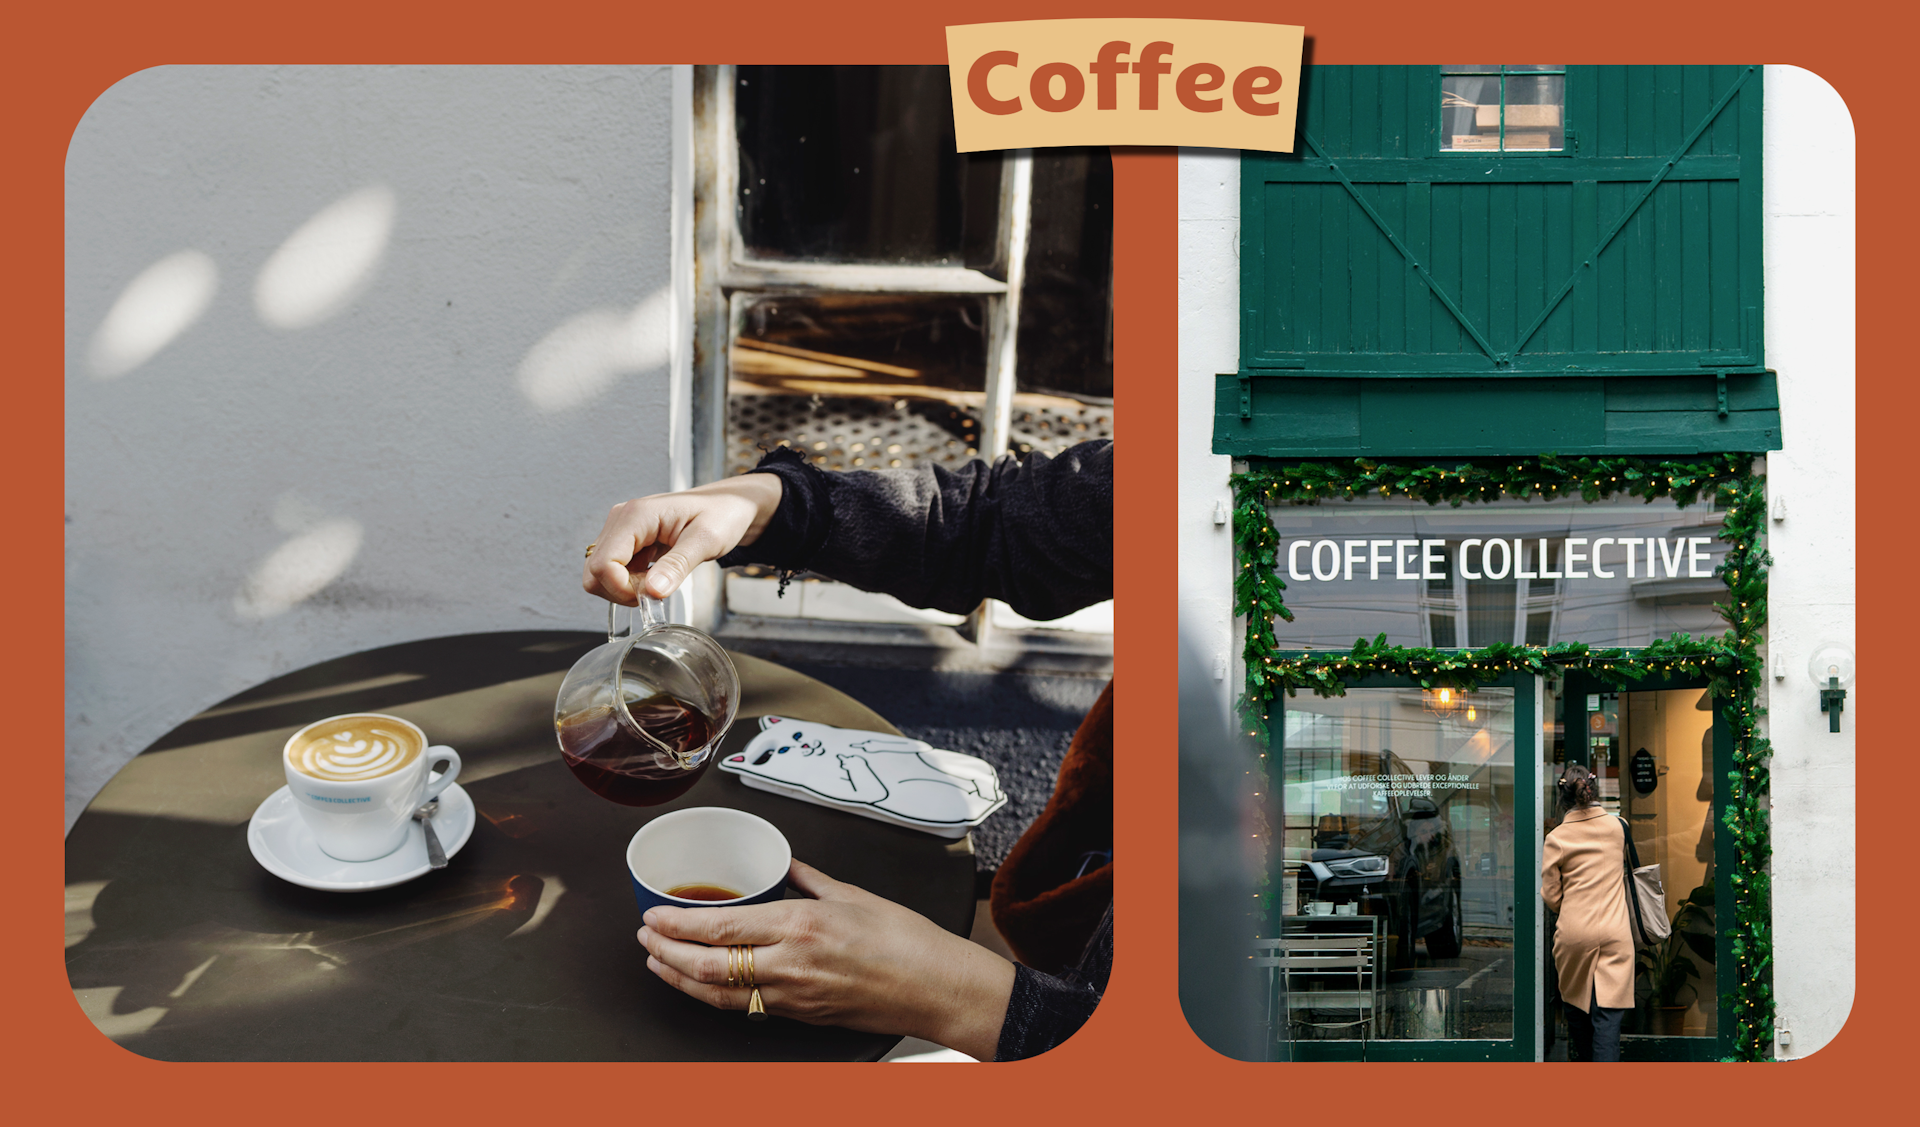 Left image shows a woman pouring a coffee at an outdoor table. Right image shows a woman walking into the green door of Coffee Collective